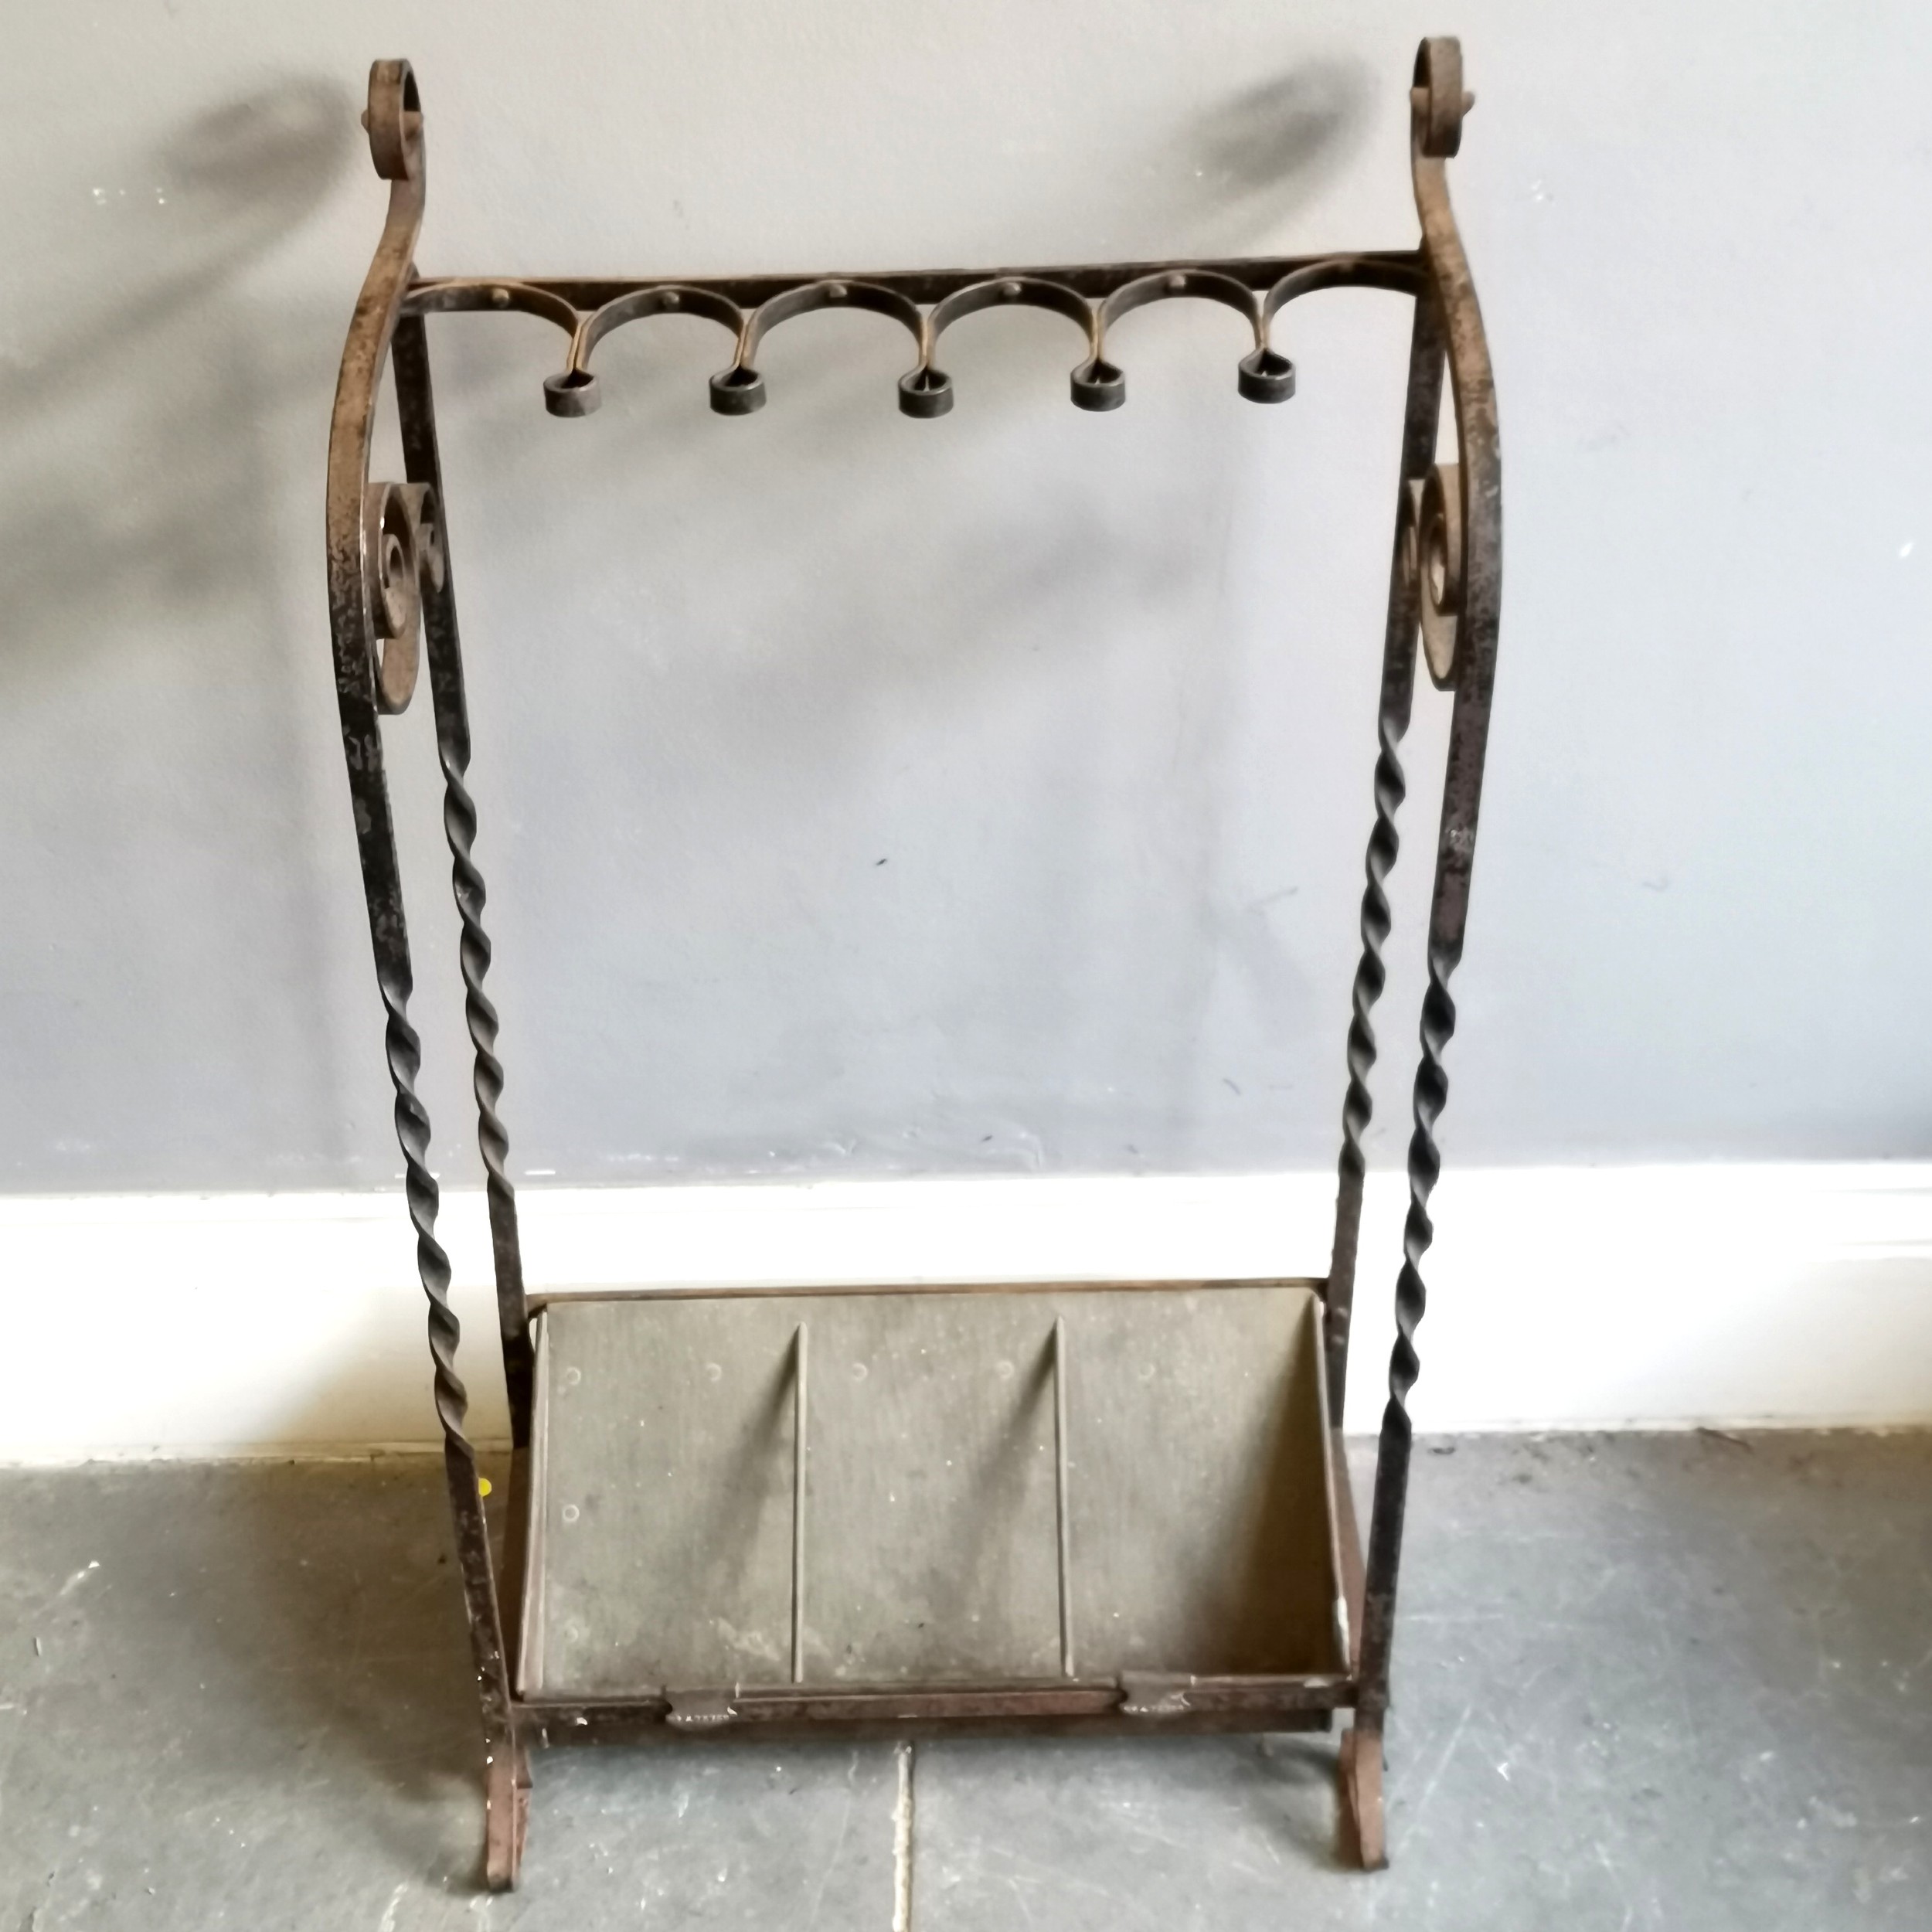 Antique wrought iron stick stand with brass & steel drip tray (Rd 473759) - 83cm high x 44cm wide